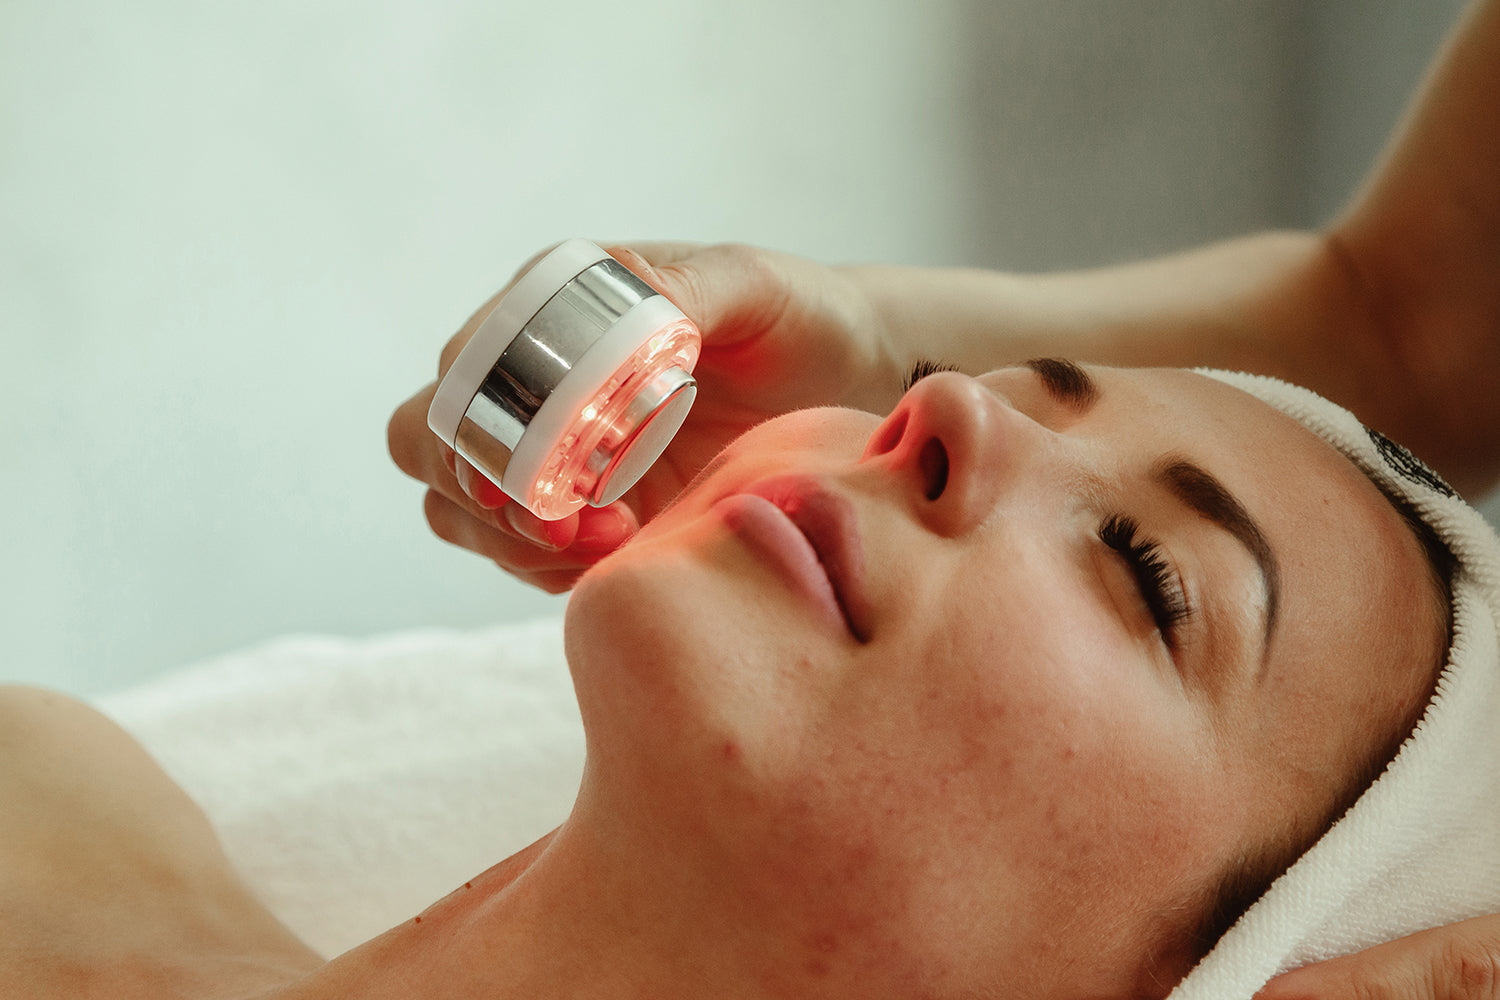 How Much Red Light Therapy Is Too Much?